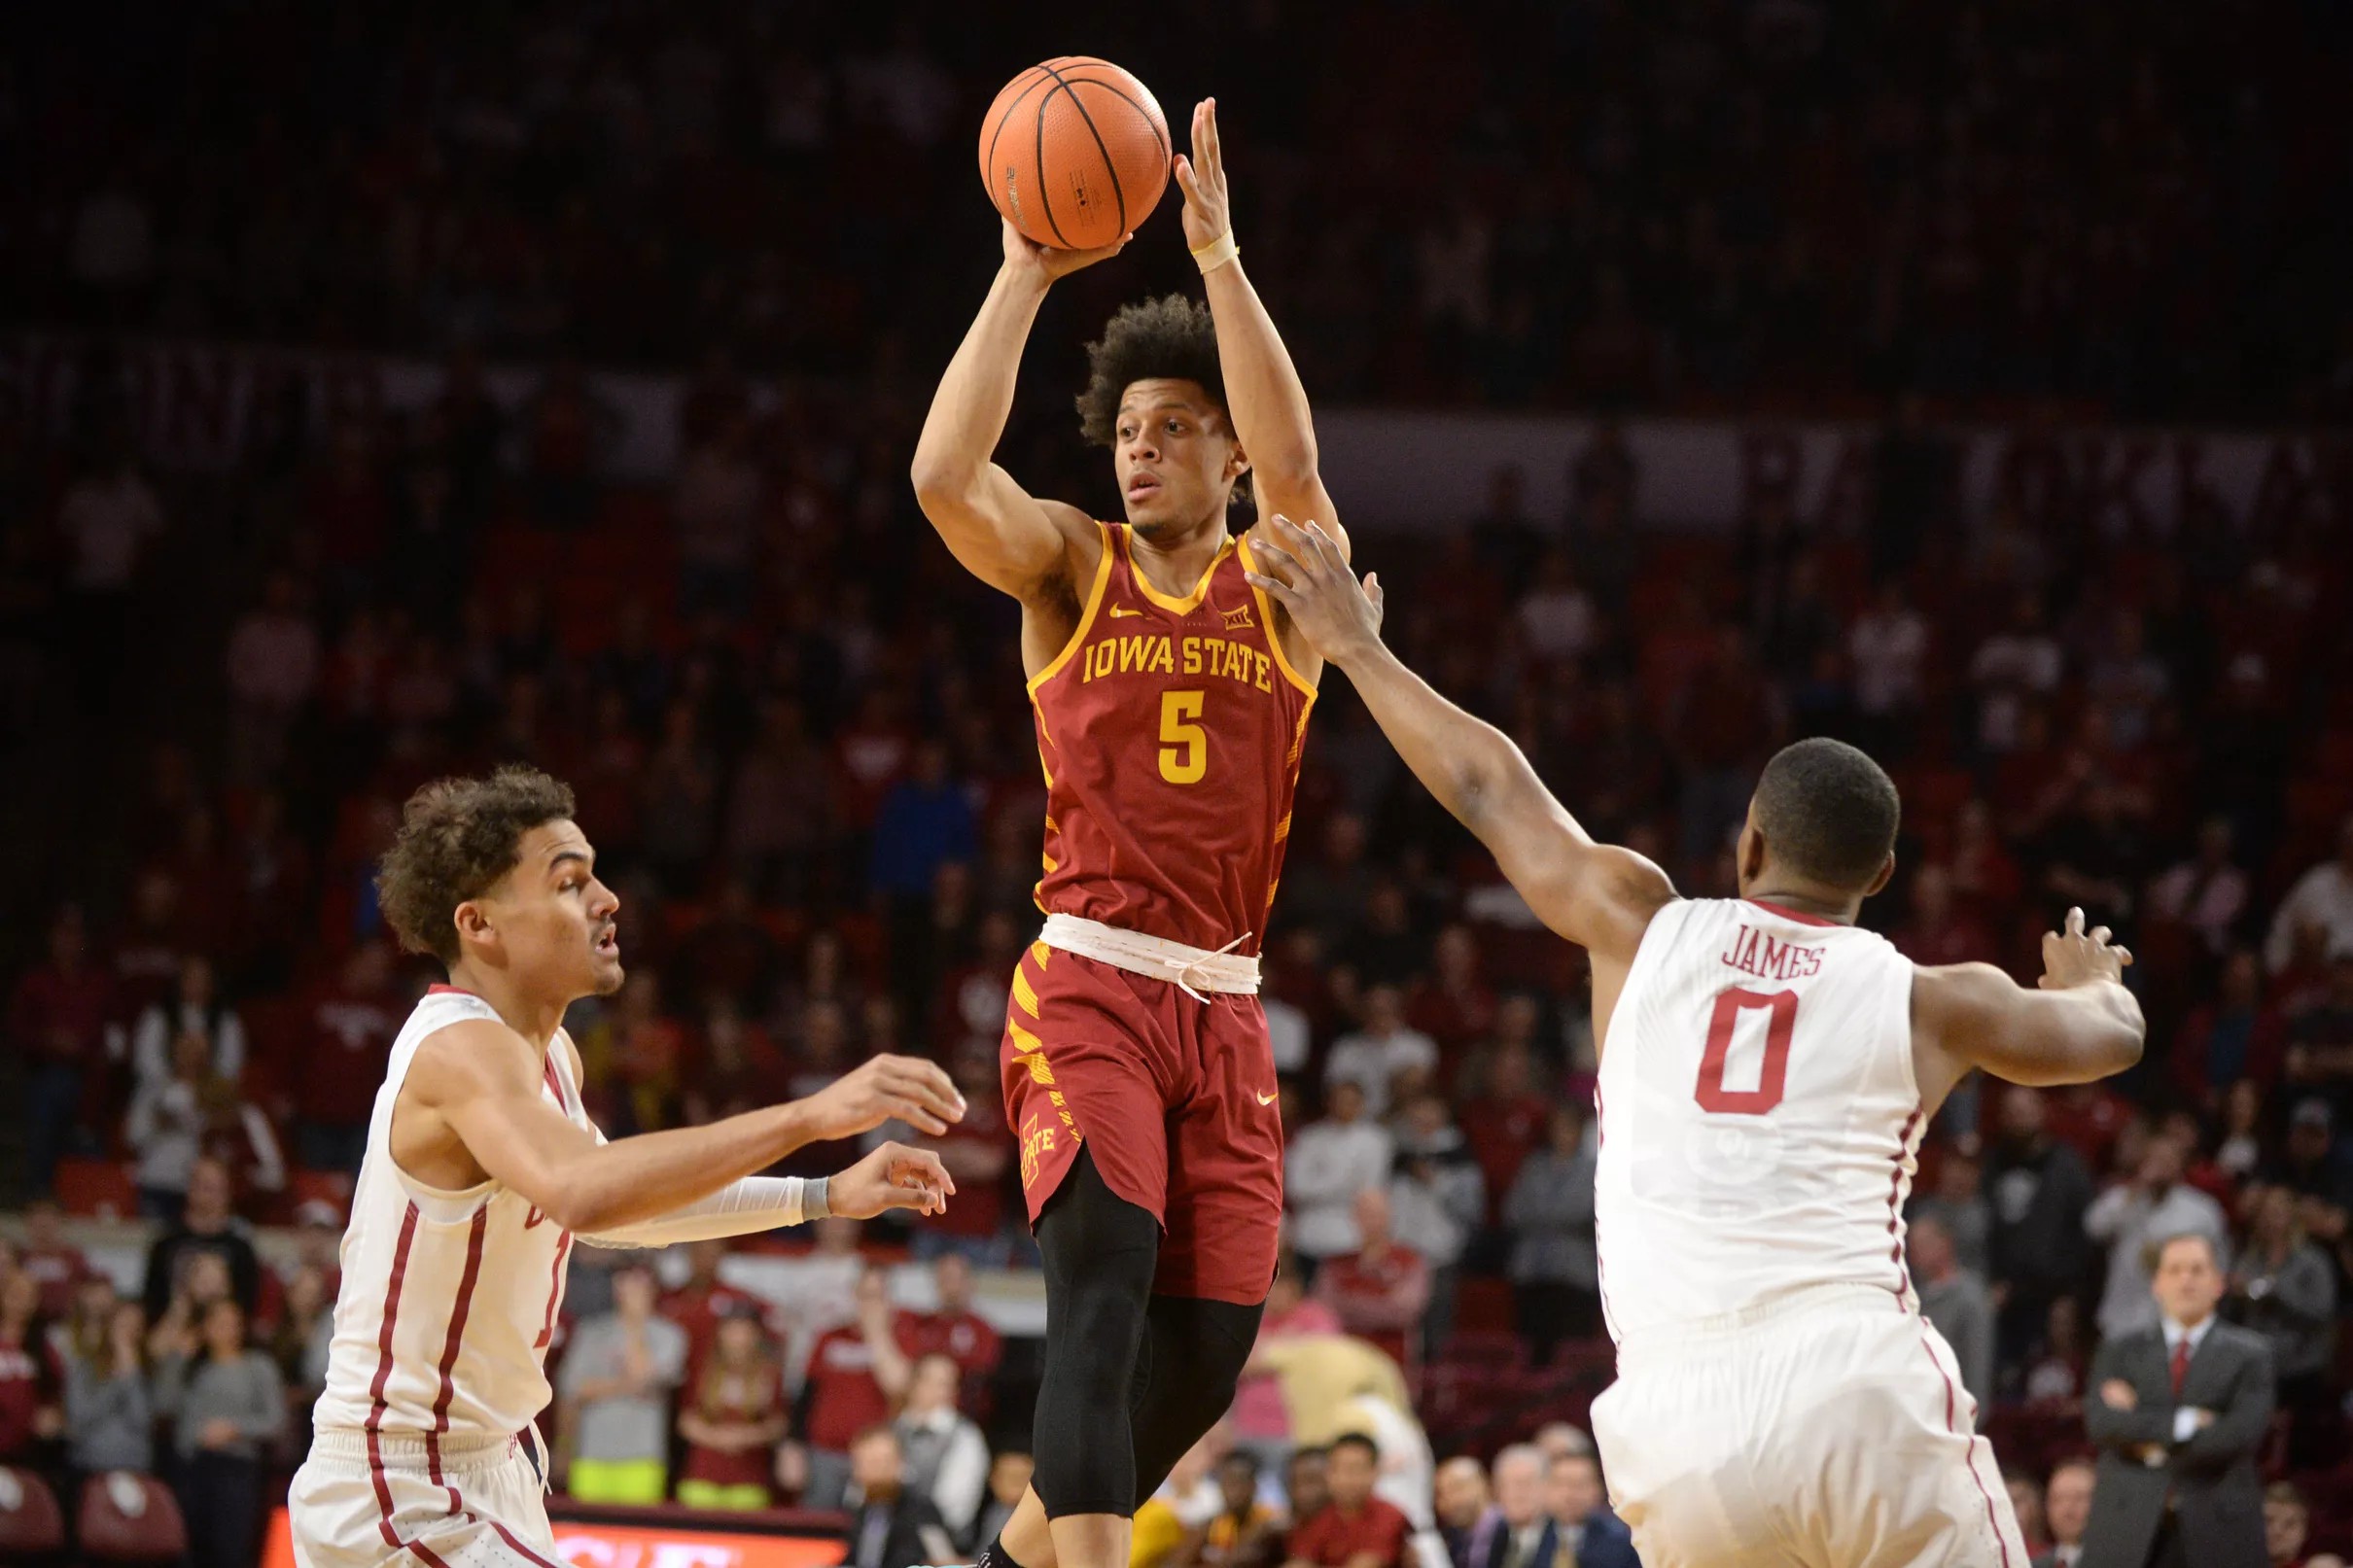 20172018 Iowa State Basketball Season in Review, Part 1